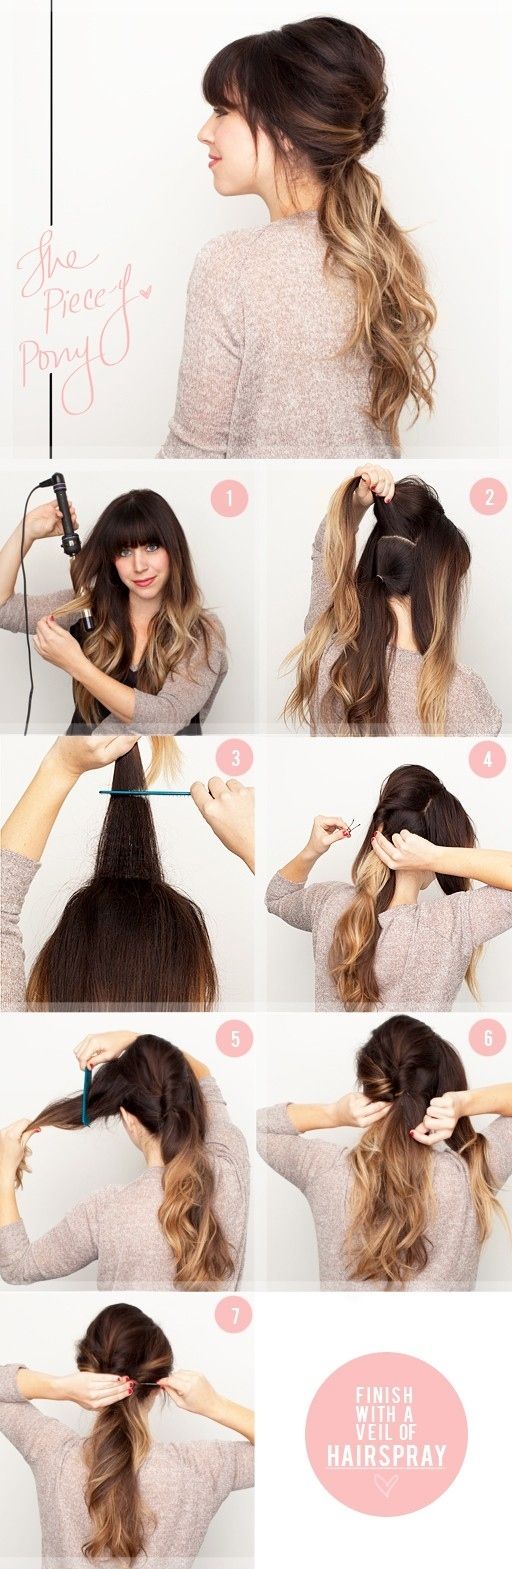 25 hairstyles for long hair.: 